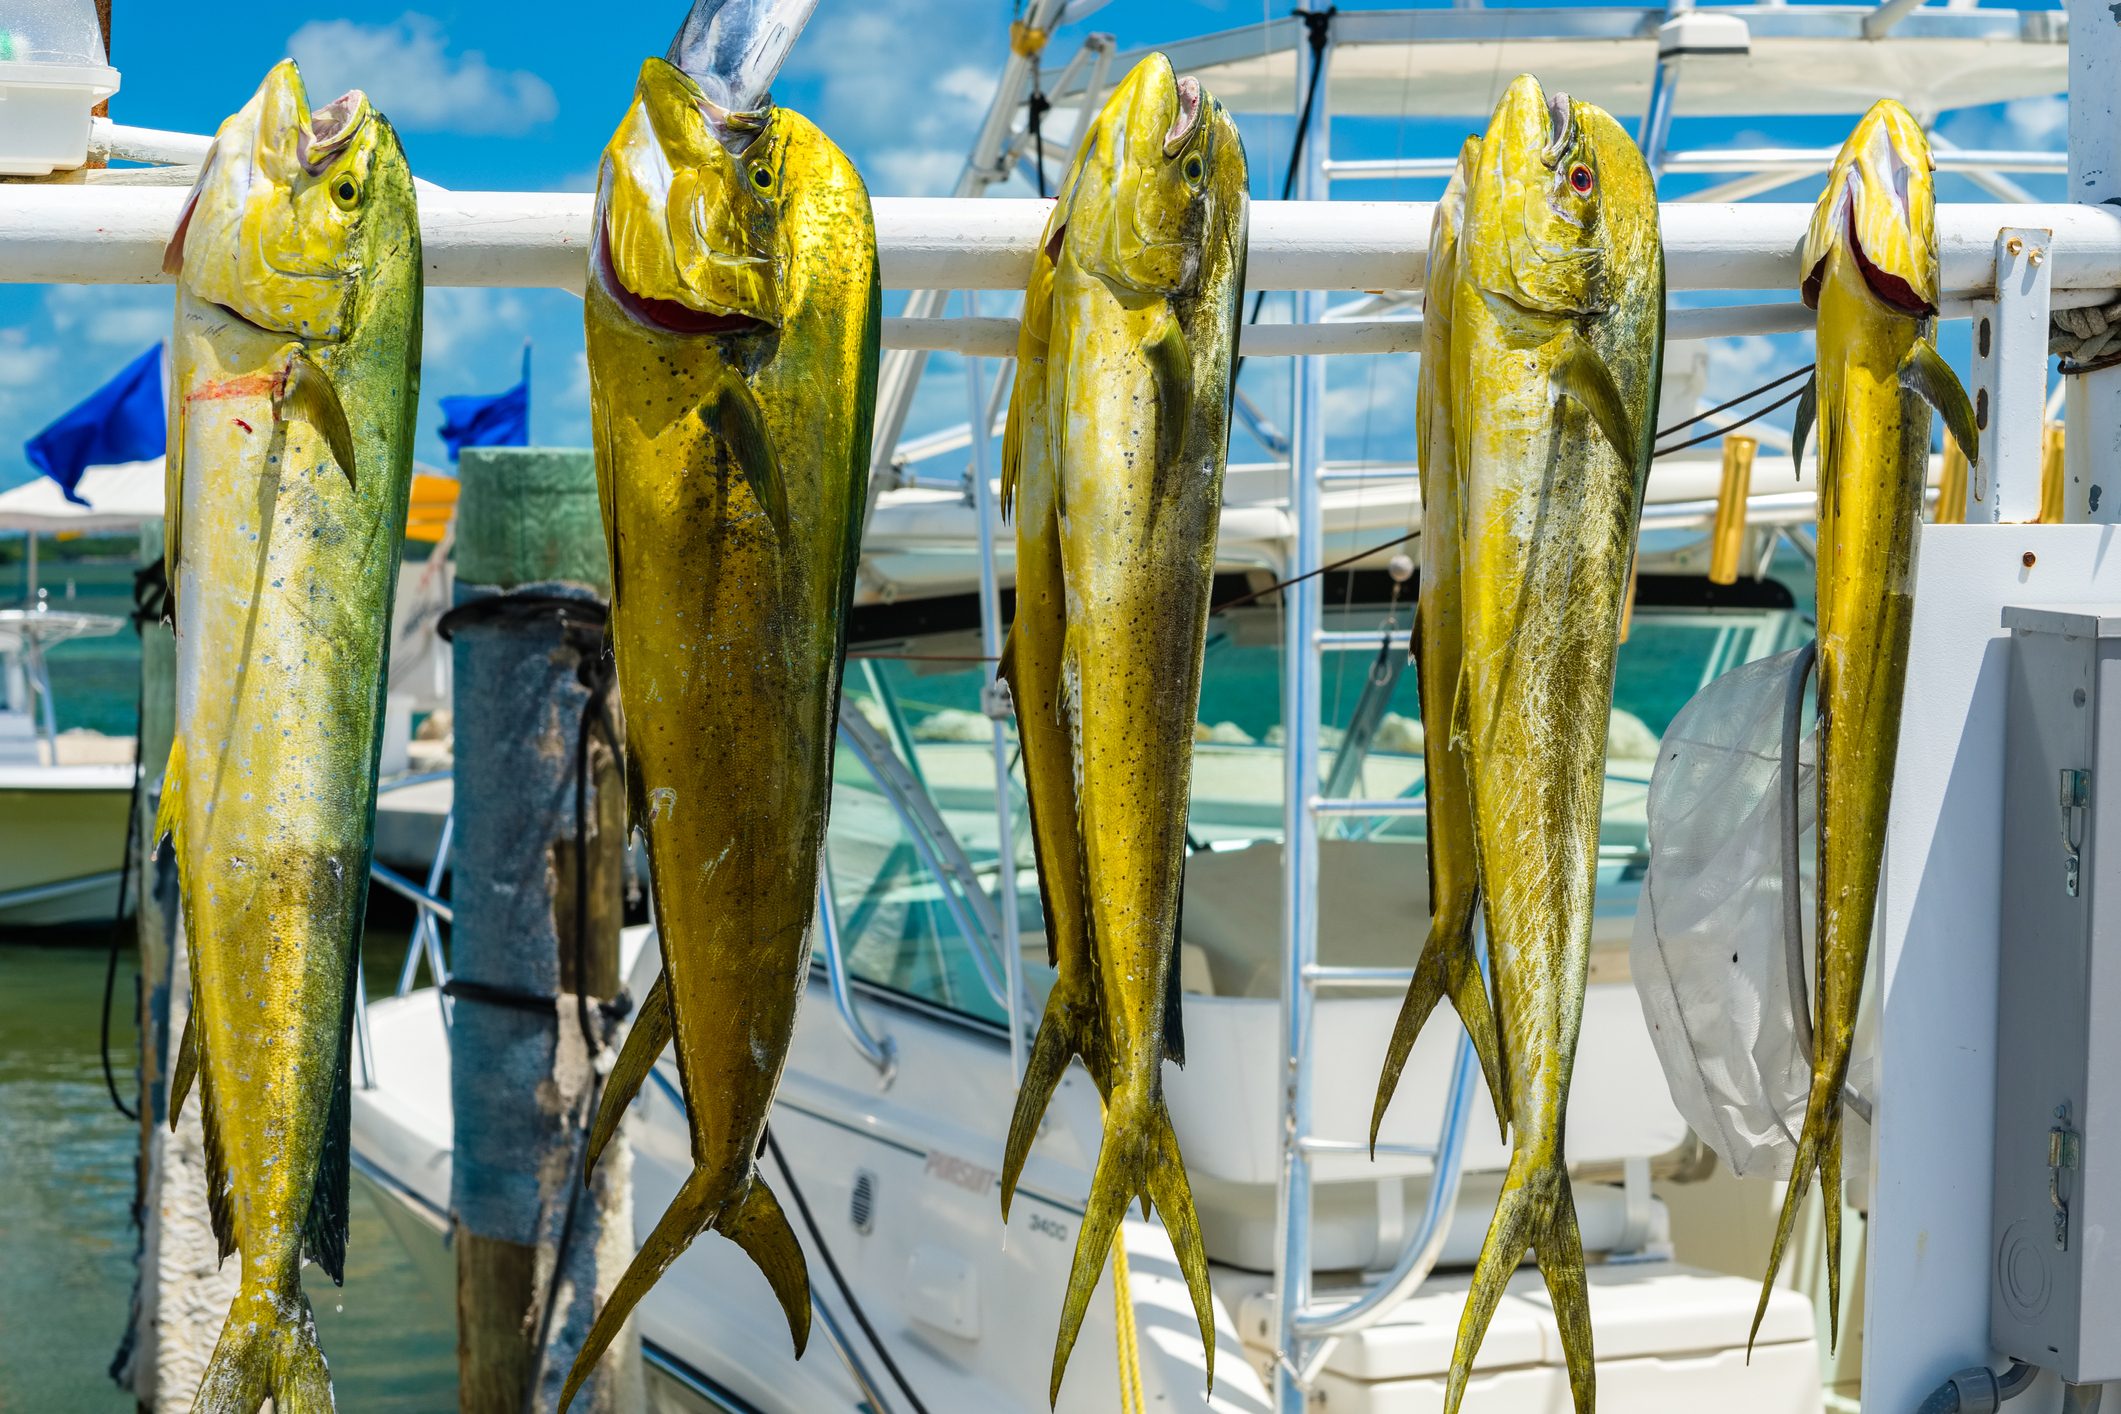 <p><strong>Mile marker:</strong> 90–63</p> <p>Next up en route from Key Largo to Key West is the fisherman's paradise known as Islamorada. Considered the Sport Fishing Capital of the World, it's where backcountry sport fishing and saltwater fly-fishing got their start. Countless seasoned boat captains are ready for hire to take you out to catch the wahoo, marlin, mahi-mahi and tuna that swim in these waters.</p> <p>There's an even quirkier way to interact with fish here: hand-feeding the tarpon off the docks of Robbie's Marina (MM 77.5). Since 1976, countless Keys visitors have stopped to feed them, and more than 100 kinds of fish gather at the docks for their daily snacks. Feeding the fishies there is so popular, it's been named the No. 1 activity in all the Florida Keys.</p> <p>Islamorada is also a terrific spot to kitesurf, stand-up paddleboard, <a href="https://www.rd.com/list/best-hiking-trails/" rel="noopener noreferrer">go for a hike</a> or take a bicycle ride. Stop by the Laura Quinn Wild Bird Sanctuary, where injured or displaced birdies now make their homes. Or visit the History of Diving Museum, which boasts one of the world's largest collections of diving helmets.</p> <p><strong>Best beach:</strong> Anne's Beach is popular with families (and dogs) because of its shallow waters and lack of waves. Take a walk along the boardwalk or enjoy a picnic at one of the covered tables.</p> <p><strong>Where to eat:</strong> For a quintessential casual Florida Keys meal, go to the Hungry Tarpon. If you want more elegant fare, make reservations at Chef Michael's for creatively inspired local dishes.</p> <p><strong>Where to stay:</strong> When it's time to lay your head for the night, check in to one of the new oceanfront suites at <a href="https://www.tripadvisor.com/Hotel_Review-g34346-d84610-Reviews-Cheeca_Lodge_Spa-Islamorada_Florida_Keys_Florida.html" rel="noopener noreferrer">Cheeca Lodge & Spa</a>, or your own cottage at <a href="https://www.tripadvisor.com/Hotel_Review-g34346-d113464-Reviews-The_Moorings_Village-Islamorada_Florida_Keys_Florida.html" rel="noopener">The Moorings Village & Spa</a>.</p> <p class="listicle-page__cta-button-shop"><a class="shop-btn" href="https://www.tripadvisor.com/Hotel_Review-g34346-d84610-Reviews-Cheeca_Lodge_Spa-Islamorada_Florida_Keys_Florida.html">Book Now</a></p>